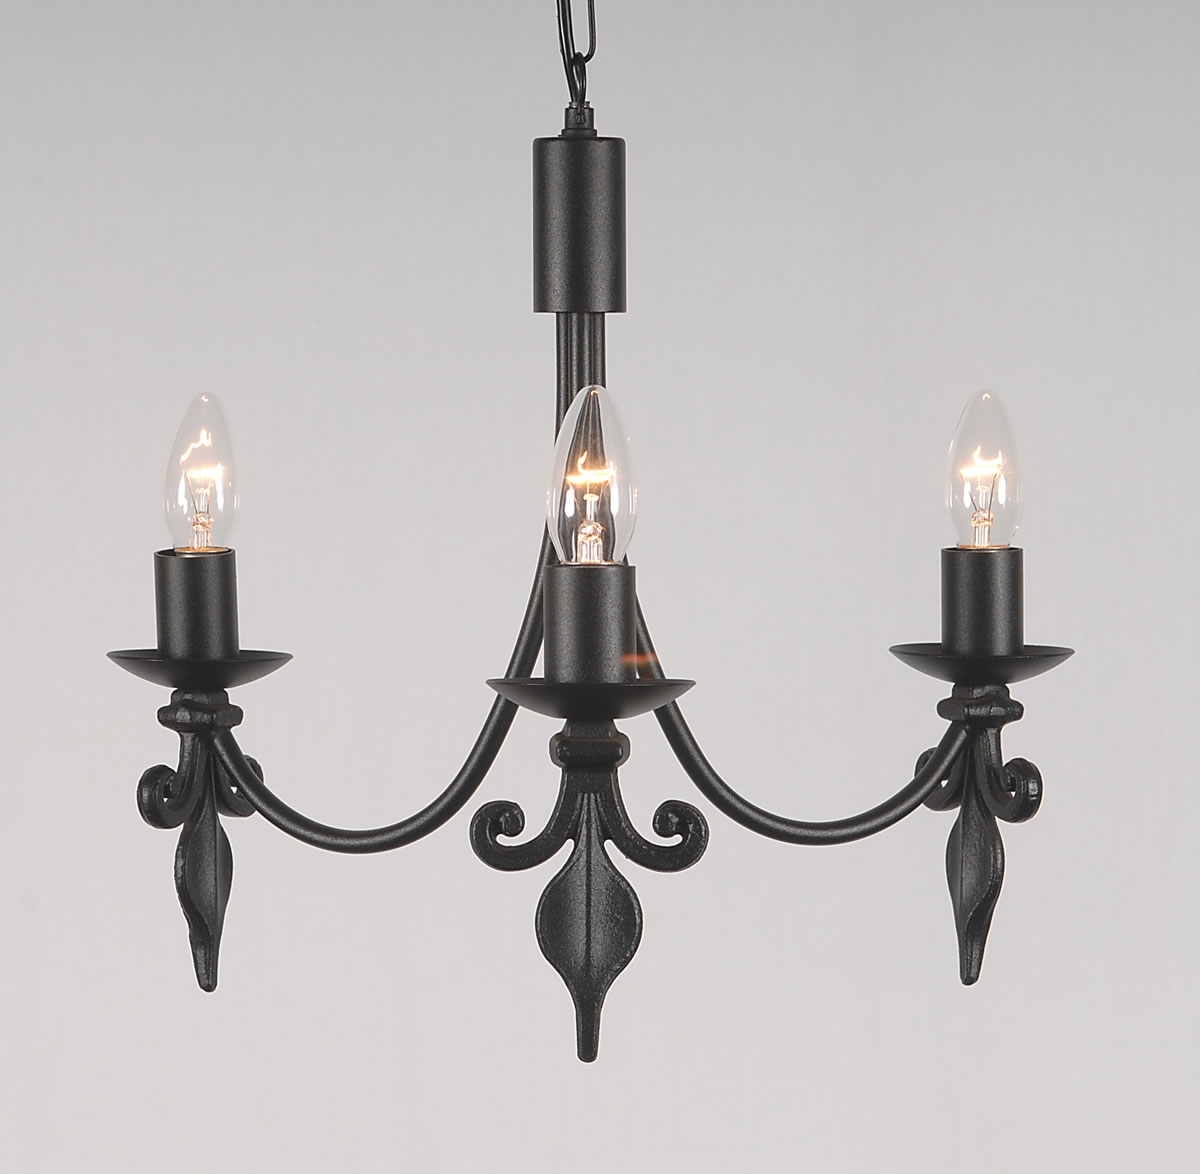 Black Wrought Iron Ceiling Lights1200 X 1174